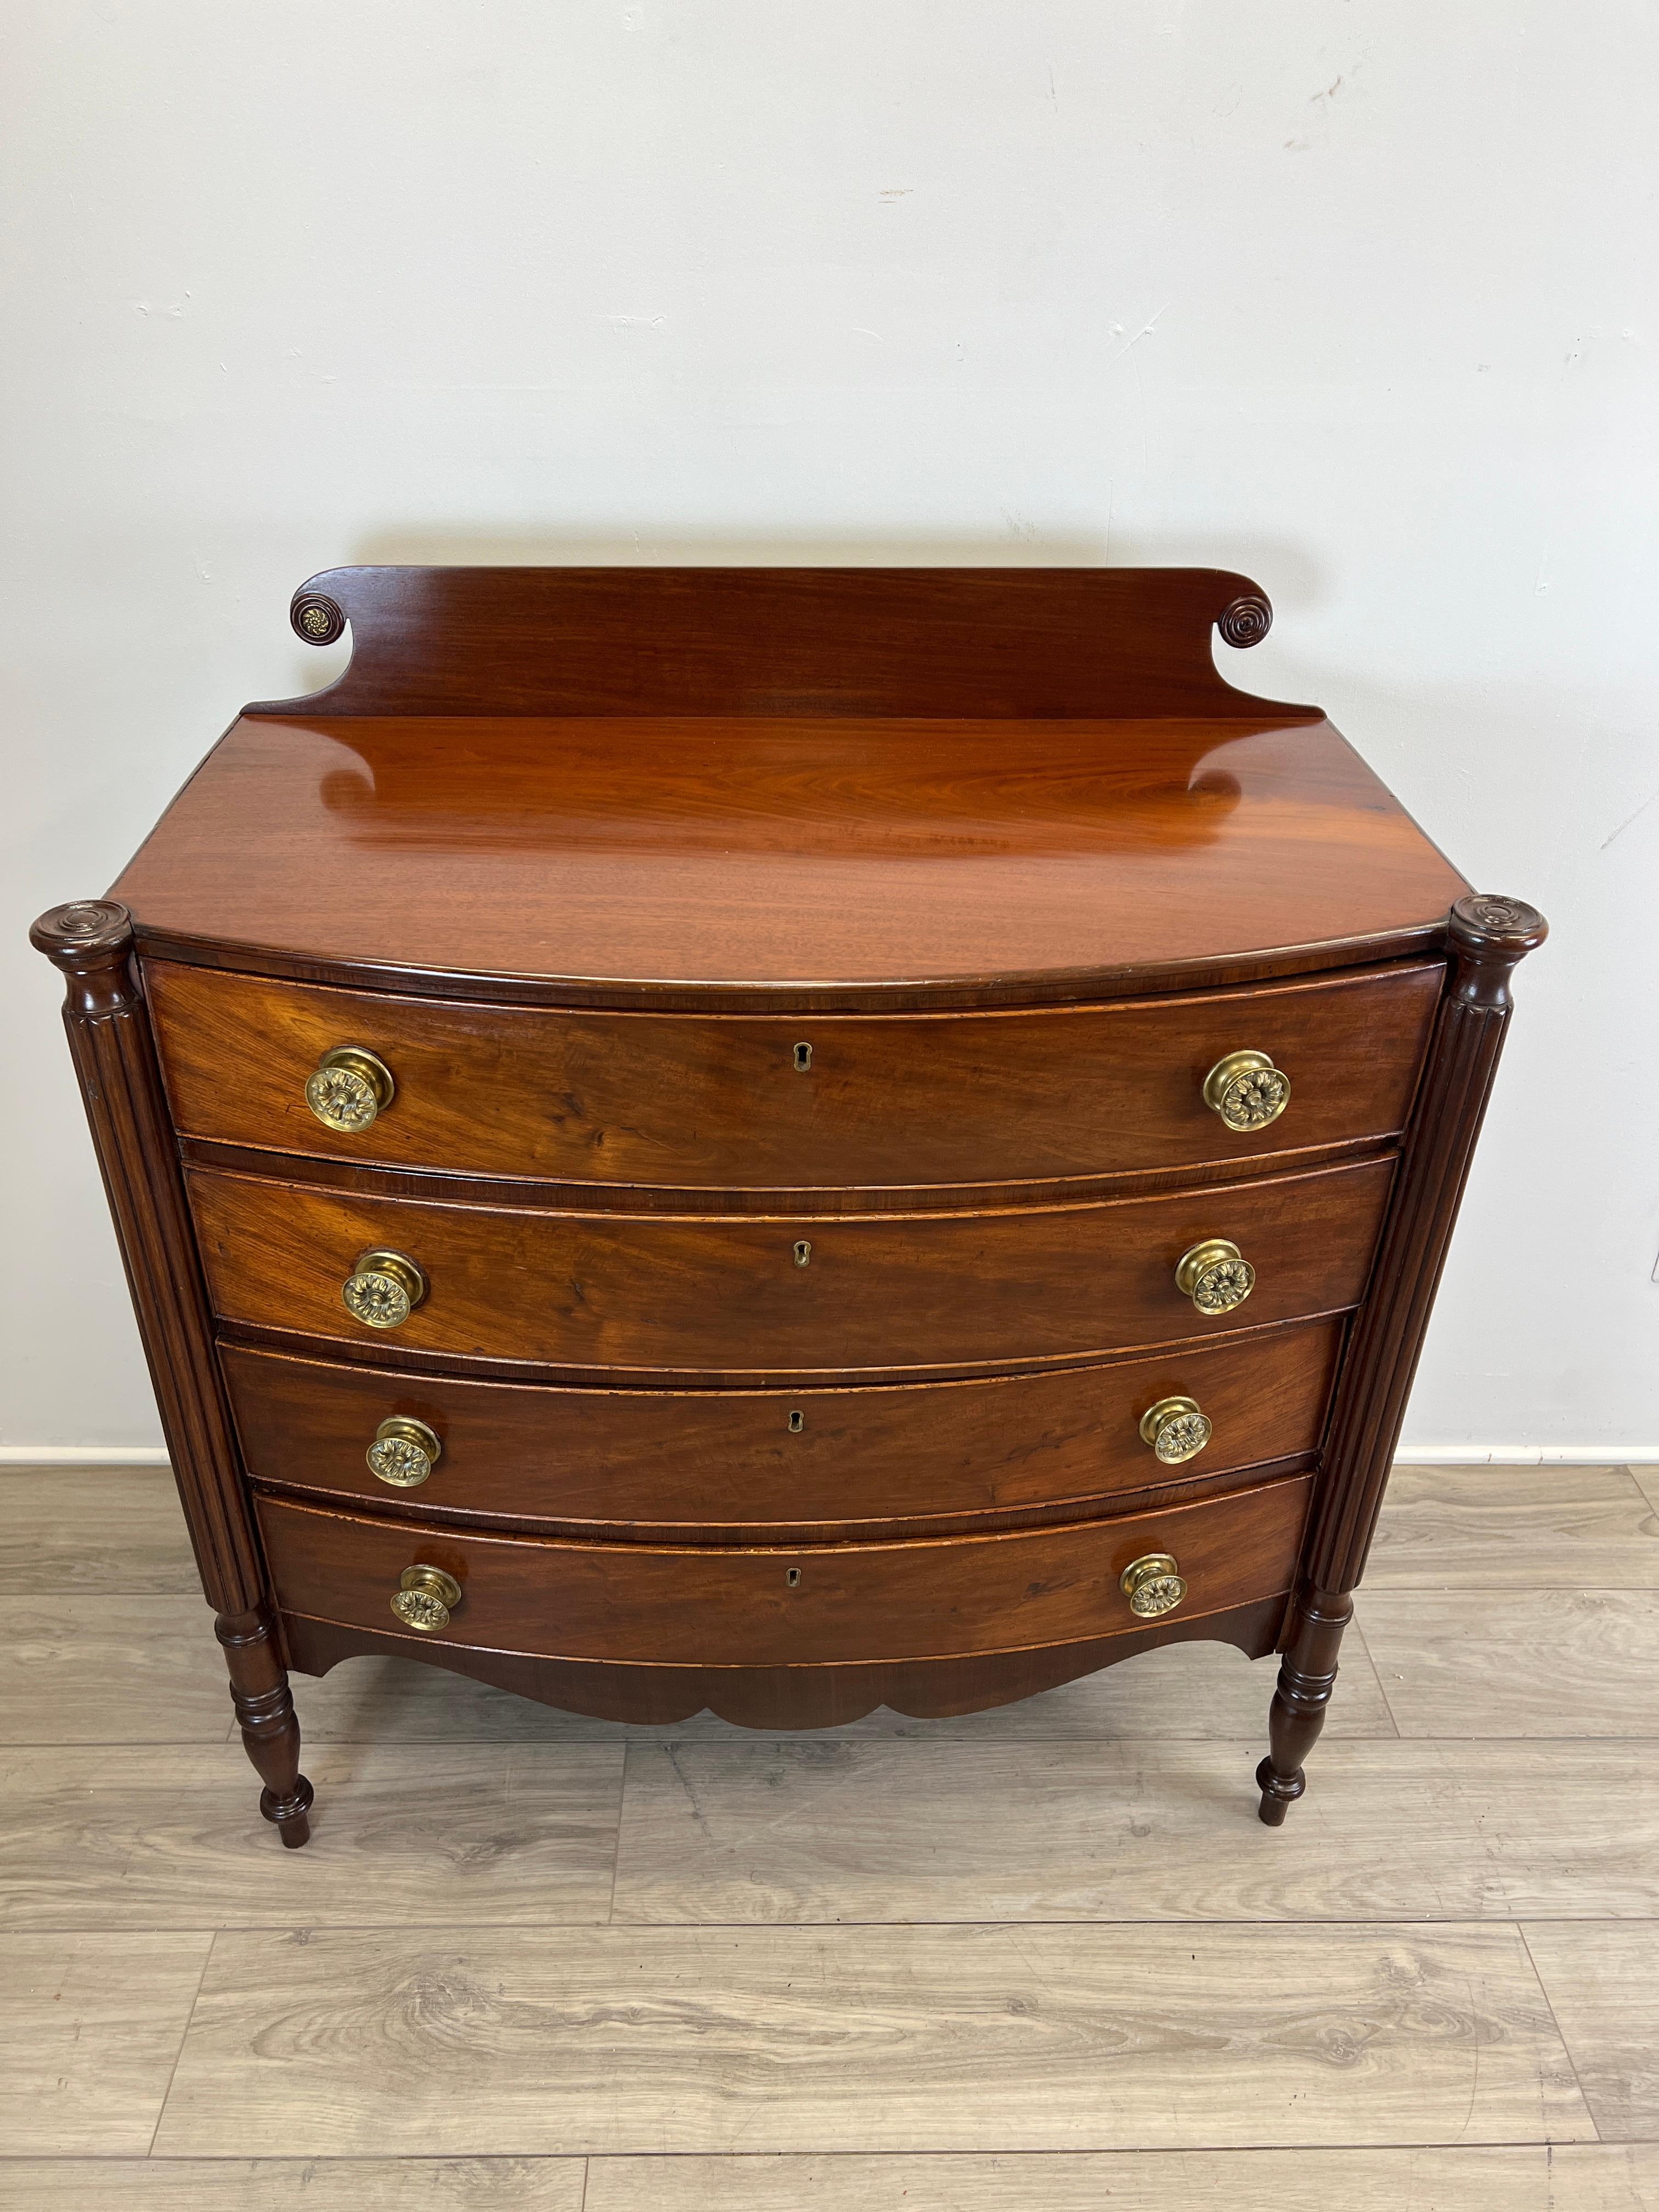 Featuring an exceptional early 19th Century American Sheraton bow front chest of drawers. The case is constructed of Honduran Mahogany. The drawers utilise yellow pine secondary woods as does the back and dust panels. There are four drawers all